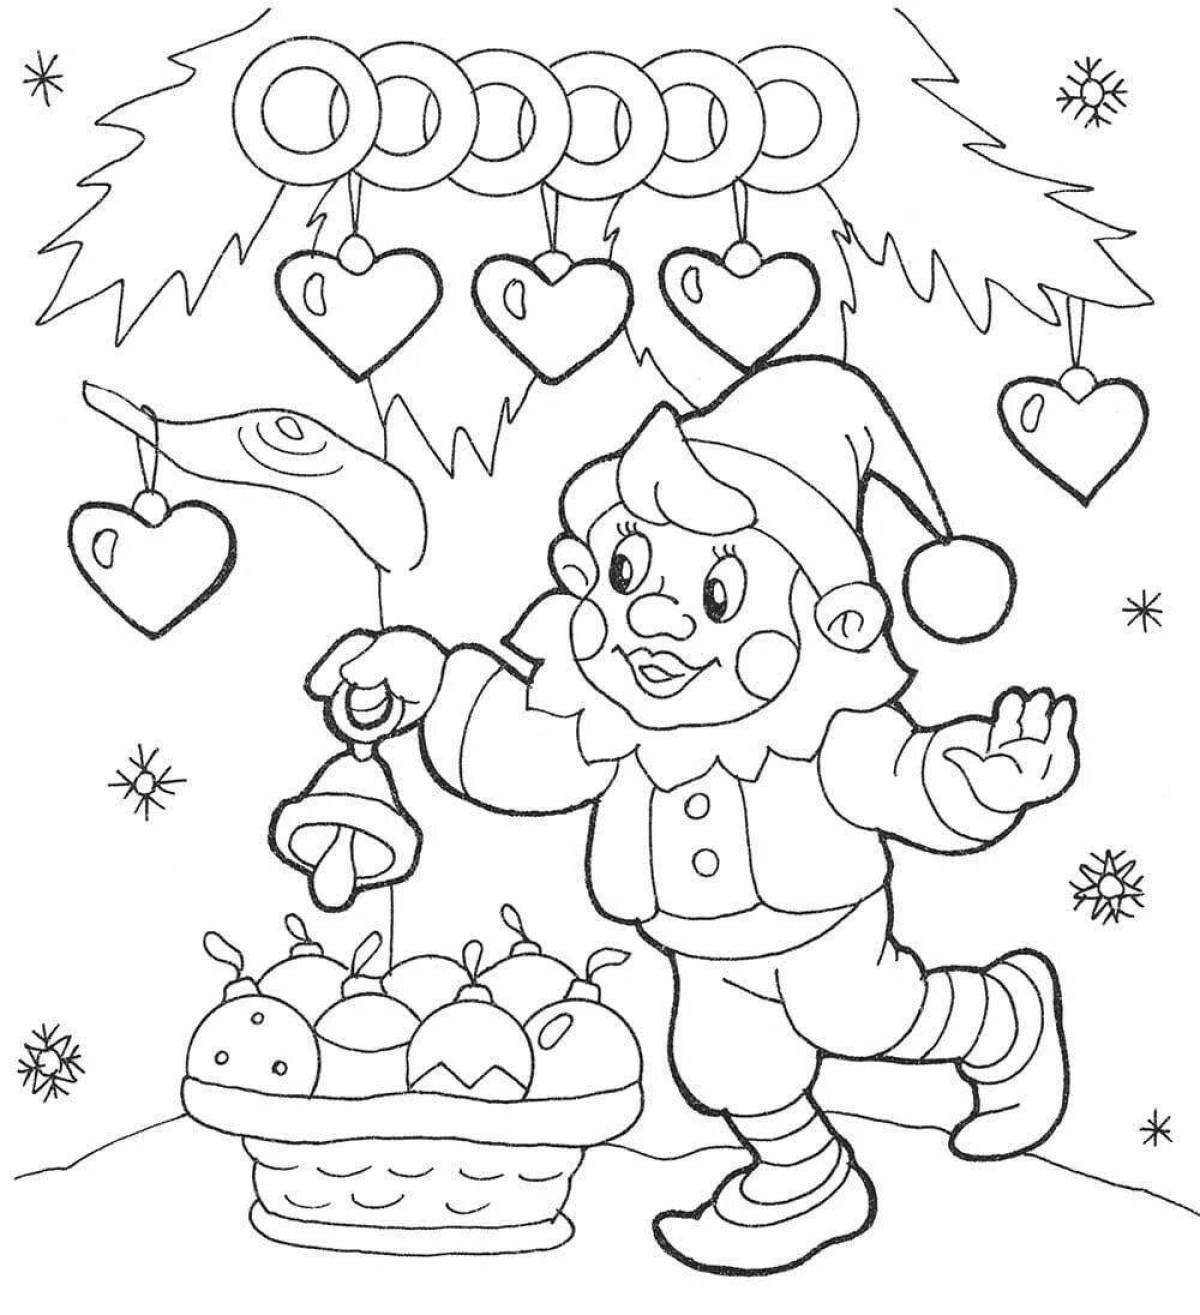 Great Christmas coloring book for kids 6-7 years old